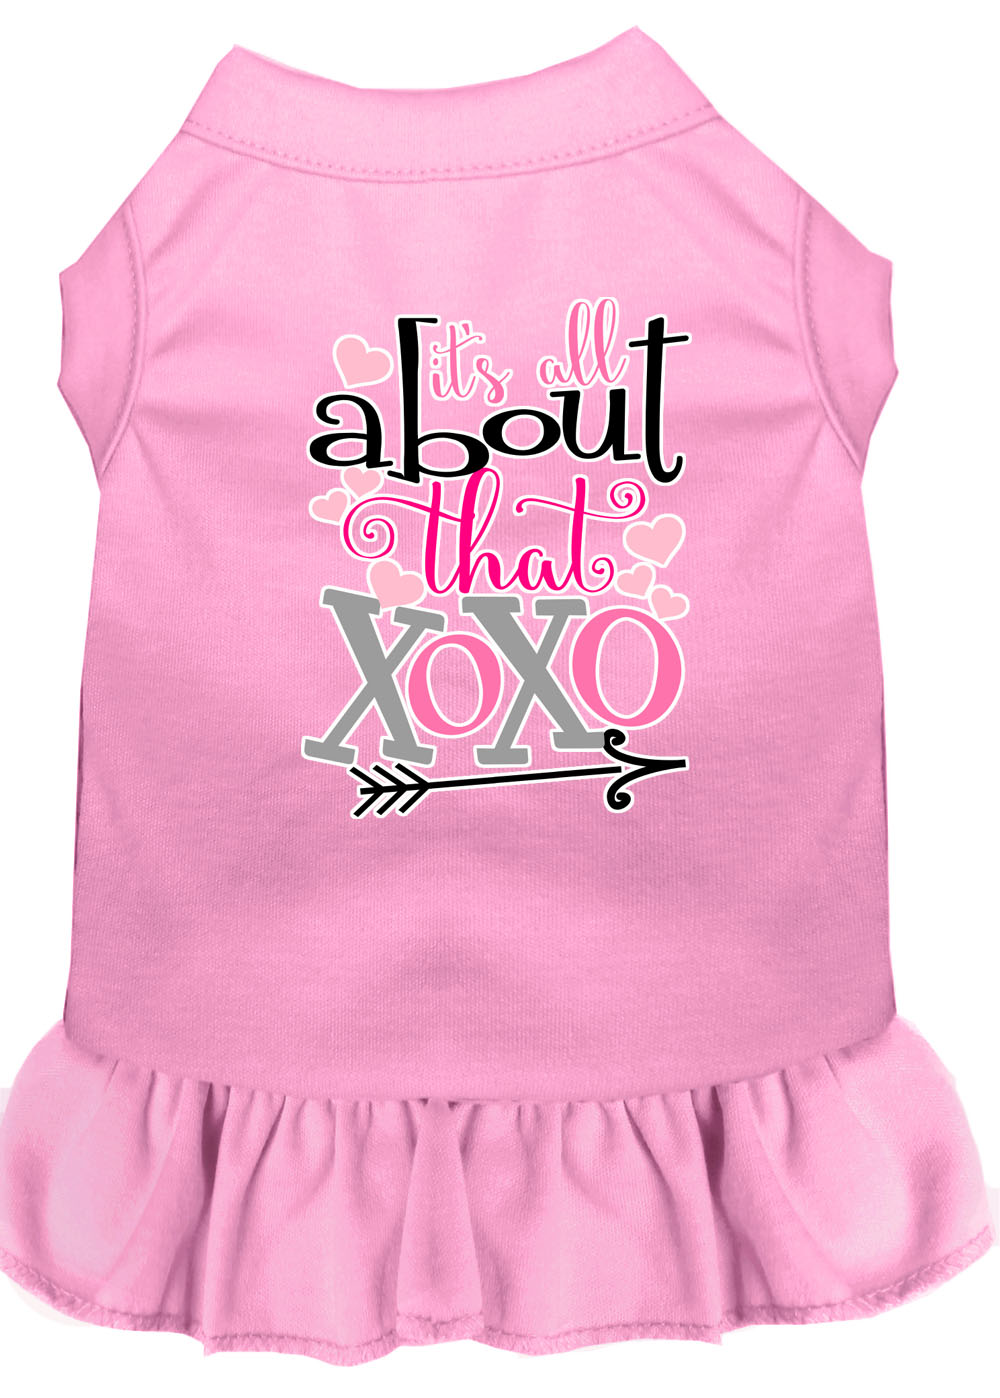 All about the XOXO Screen Print Dog Dress Light Pink Sm